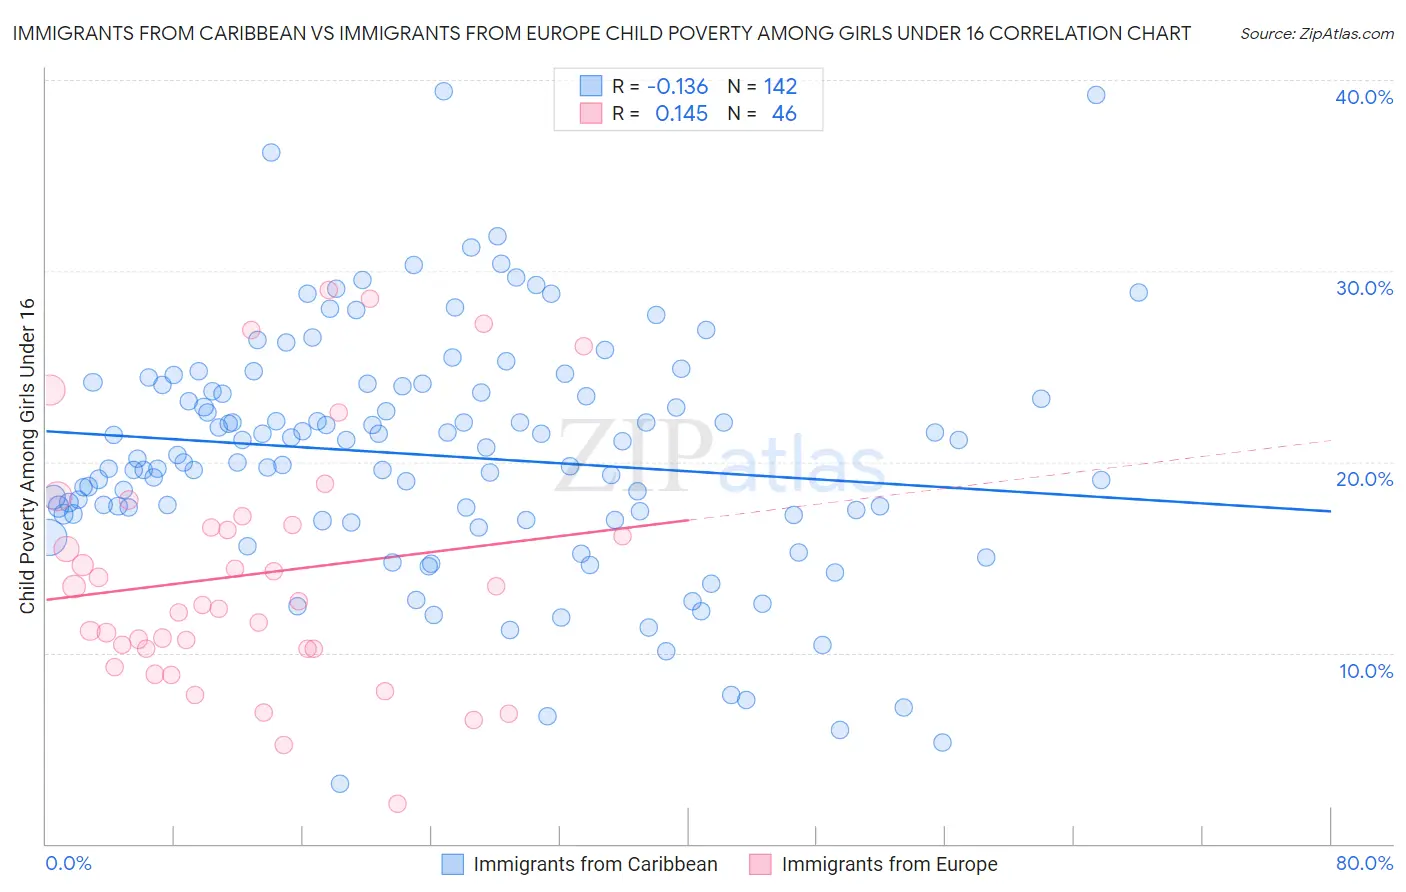 Immigrants from Caribbean vs Immigrants from Europe Child Poverty Among Girls Under 16